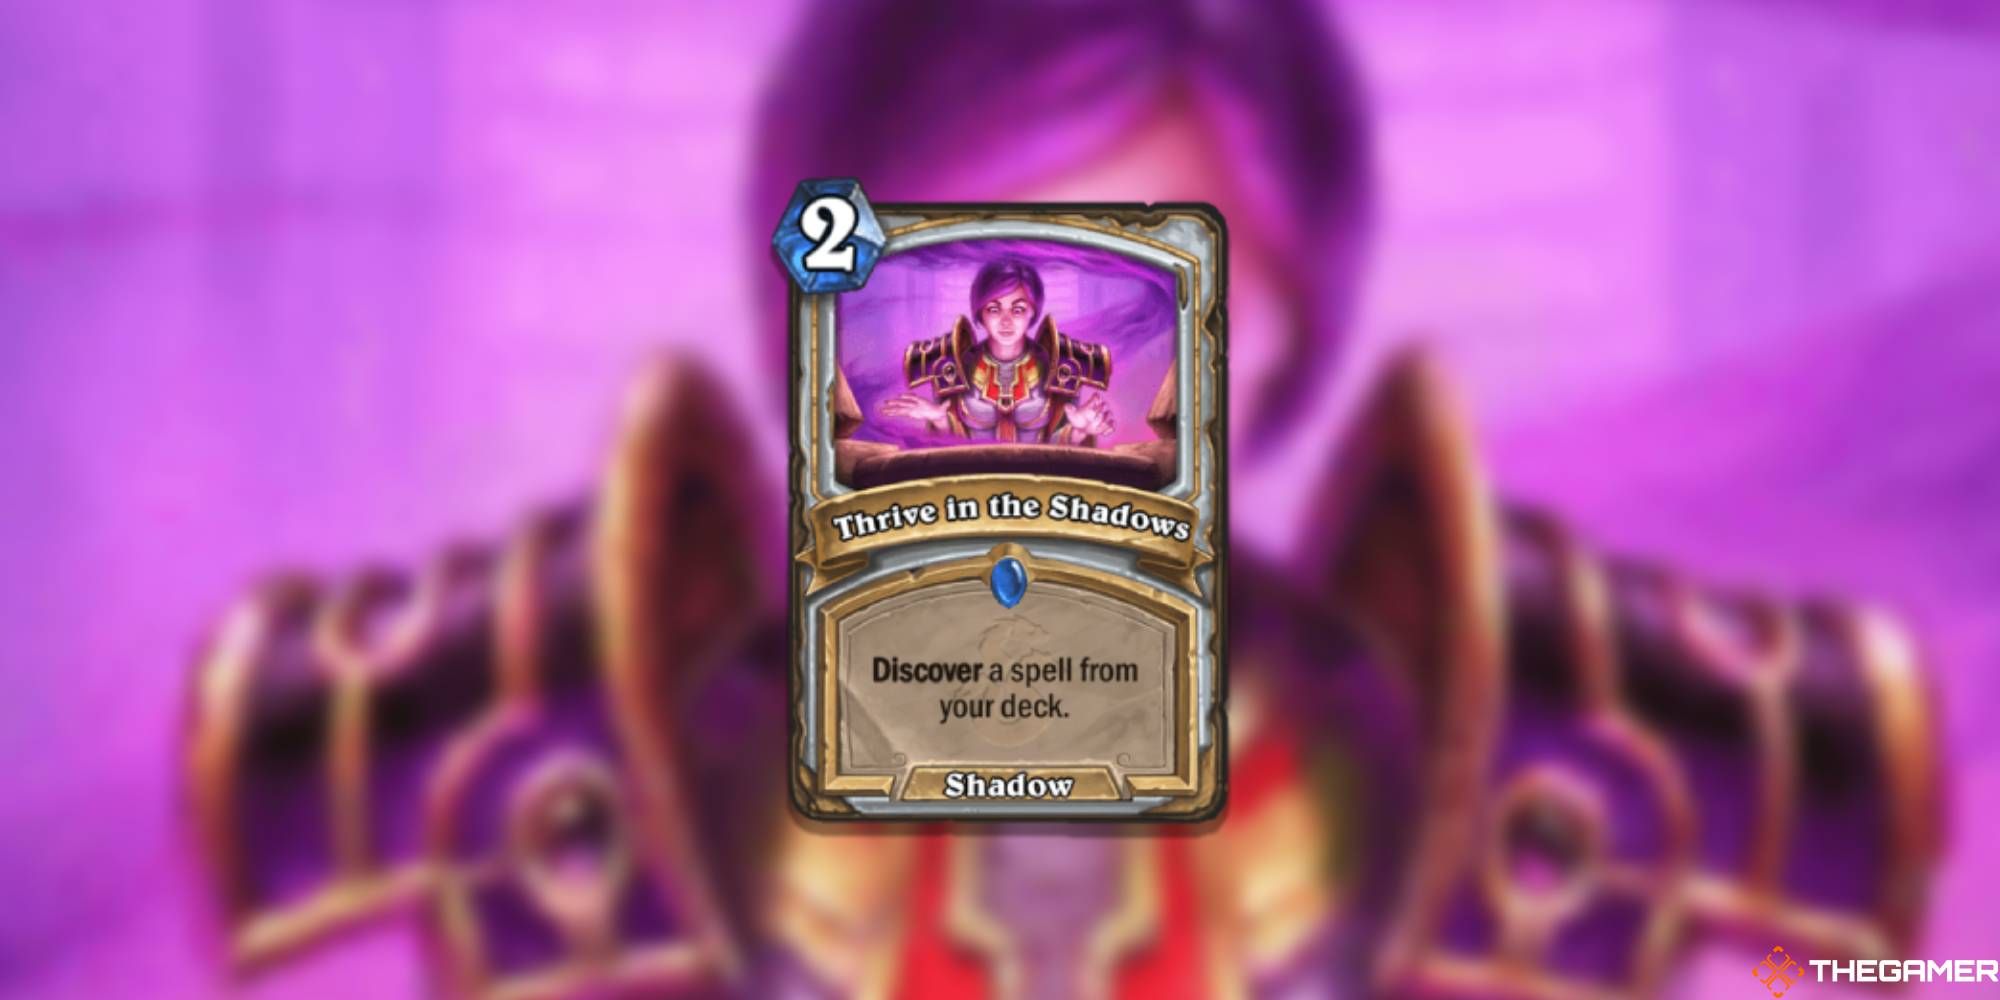 Hearthstone Wild Cards Thrive in the Shadows Discover spell 